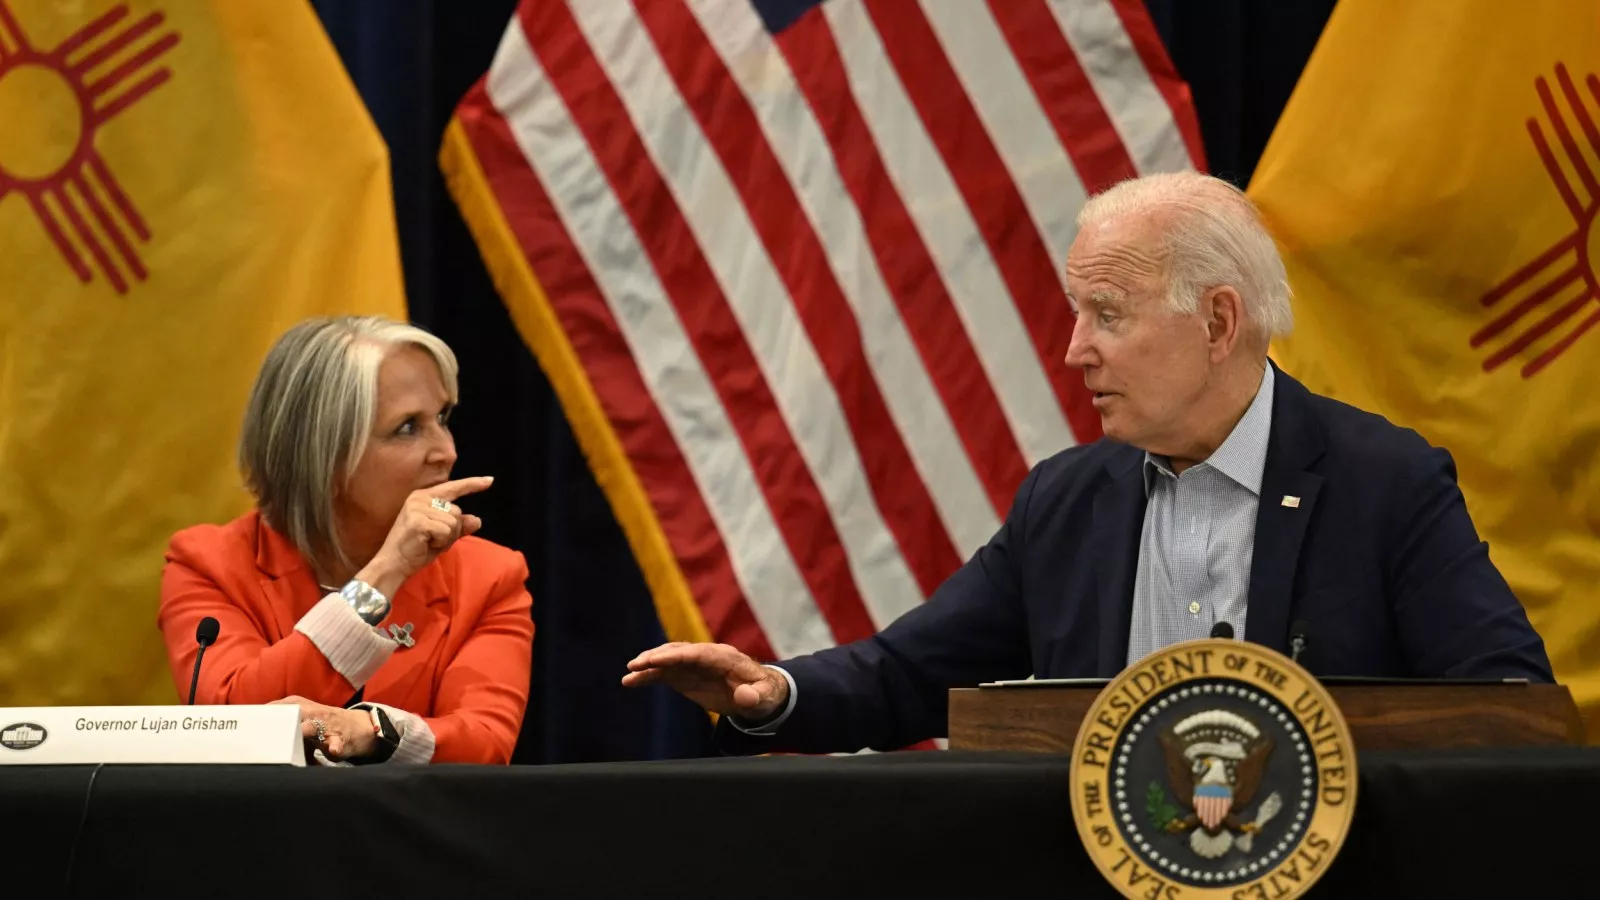 Democratic governor suggests Biden admin “persecuting” her state